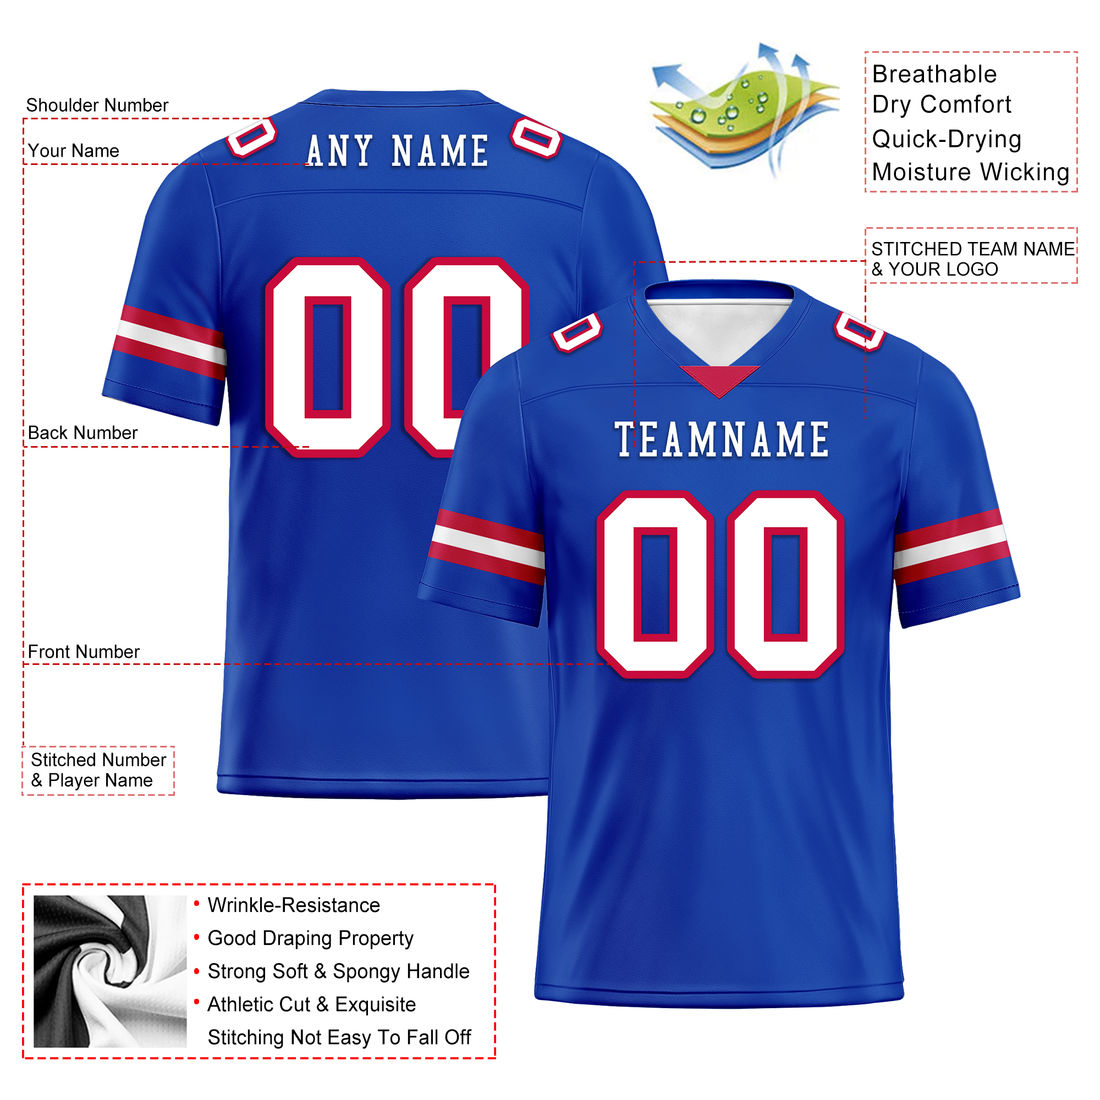 Custom Blue Classic Style Personalized Authentic Football Jersey FBJ02-bd0a70ca